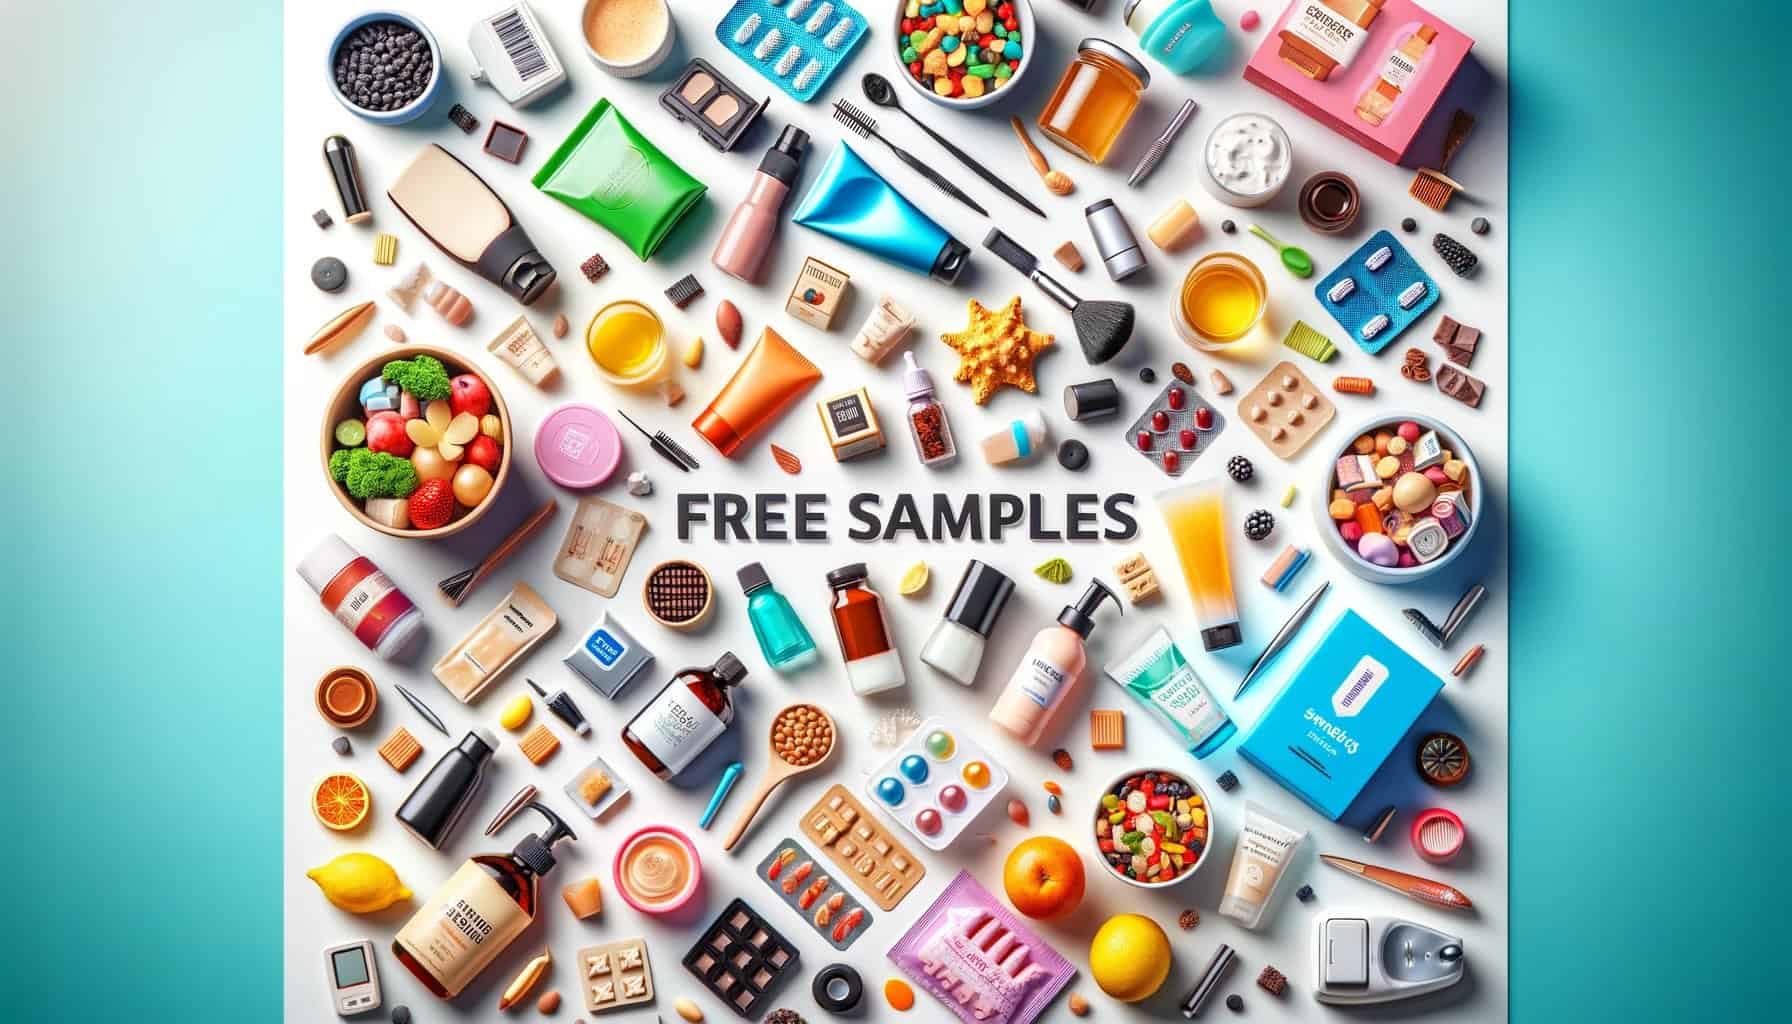 Free samples and offers